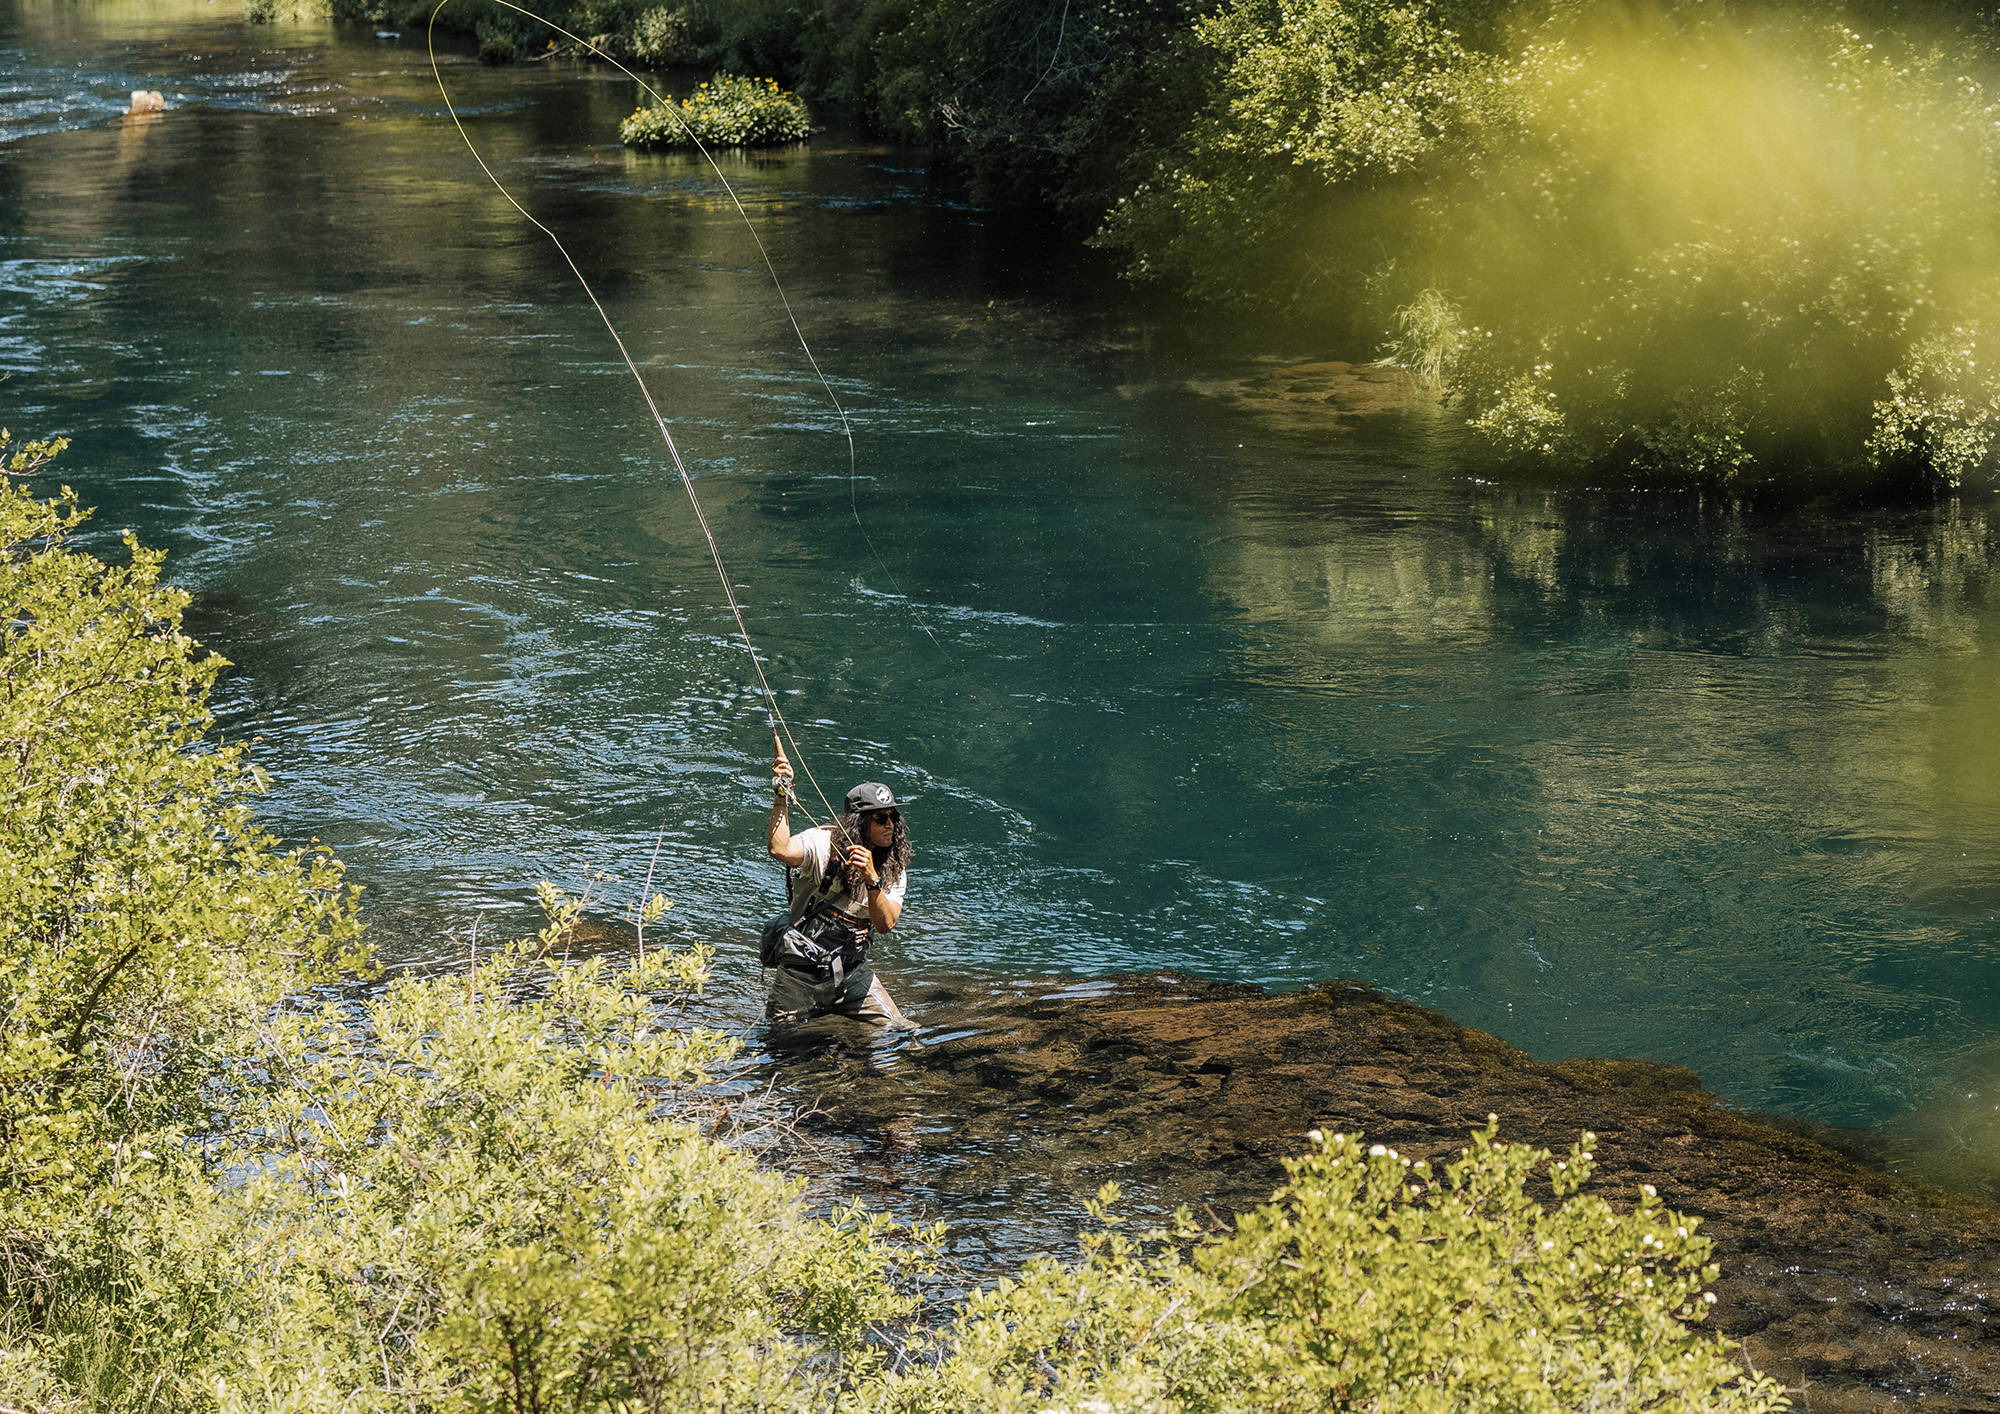 Hooked on Adventure: Fly Fishing the UBCO Way